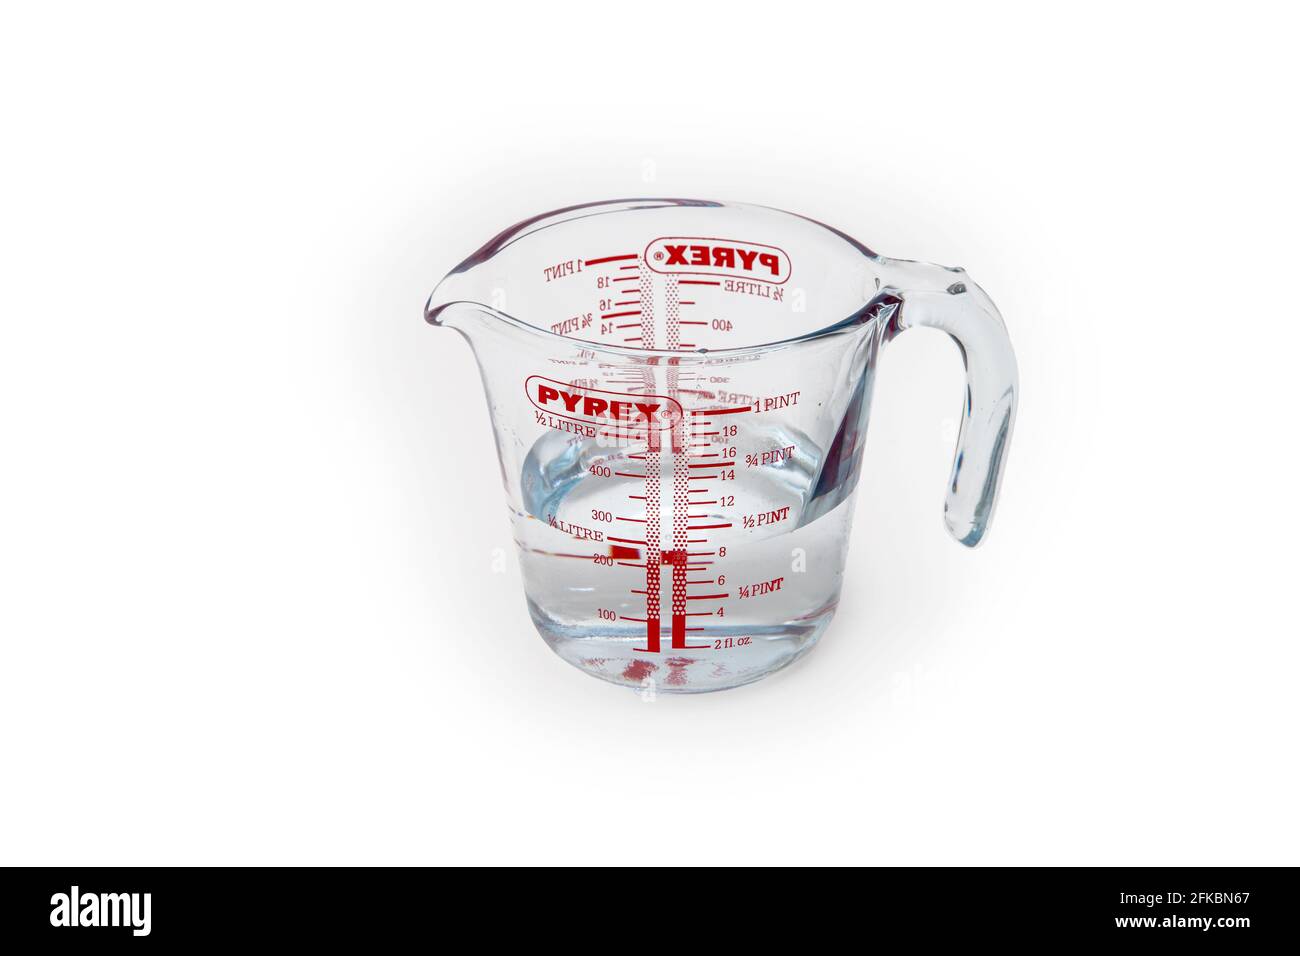 https://c8.alamy.com/comp/2FKBN67/glass-measuring-jug-half-filled-with-water-on-a-white-background-2FKBN67.jpg